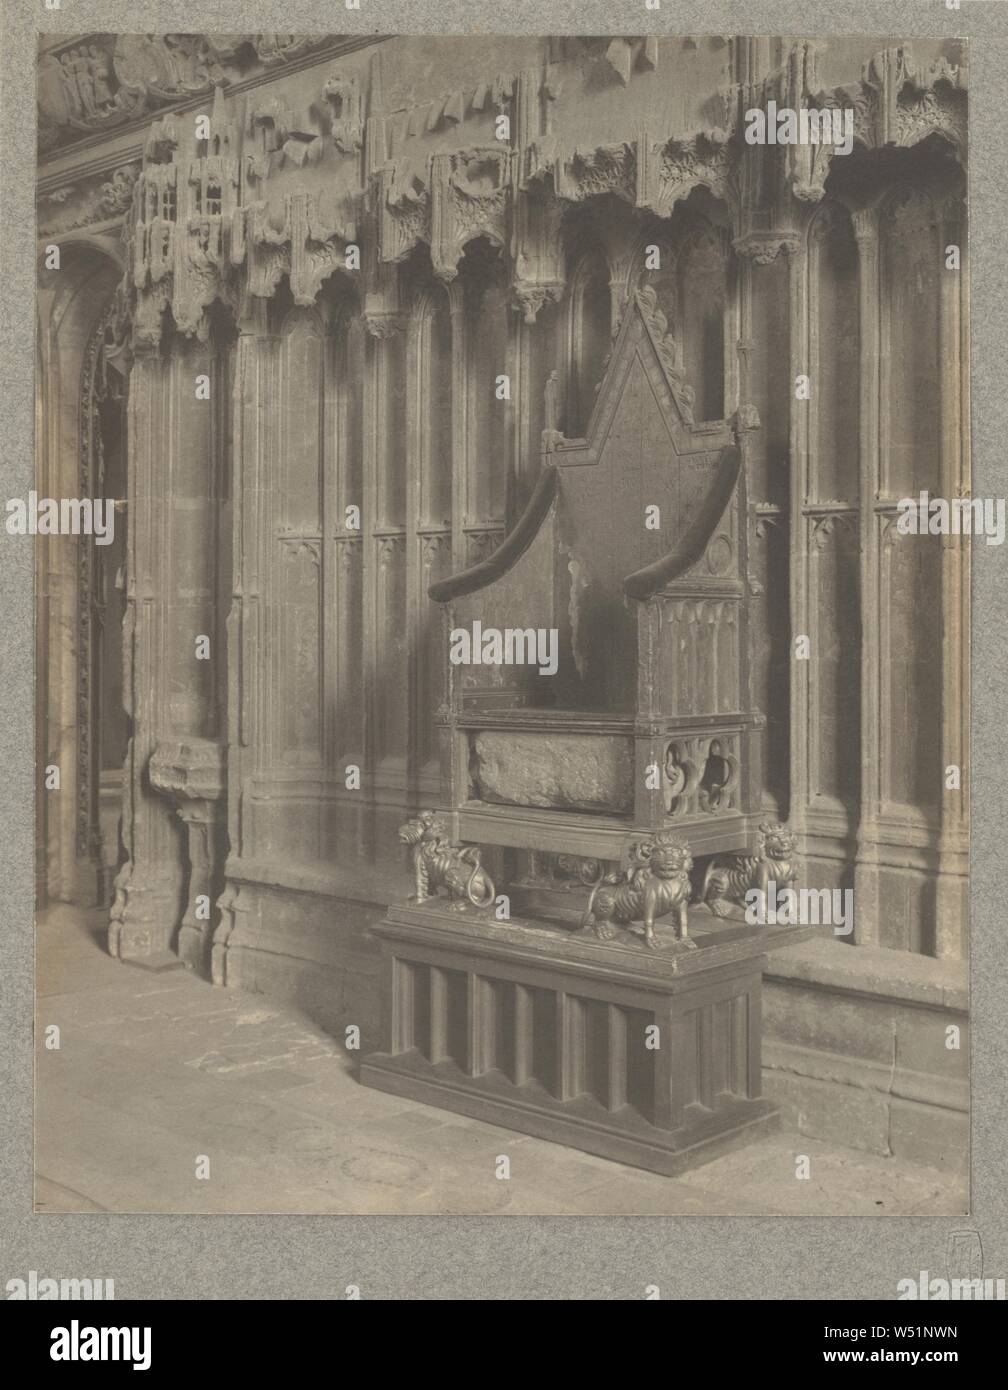 Westminster Abbey, Confessor's Chapel: Coronation Chair with Stone of Scone, Frederick H. Evans (British, 1853 - 1943), 1911, Platinum print, 24.4 x 19.4 cm (9 5/8 x 7 5/8 in Stock Photo